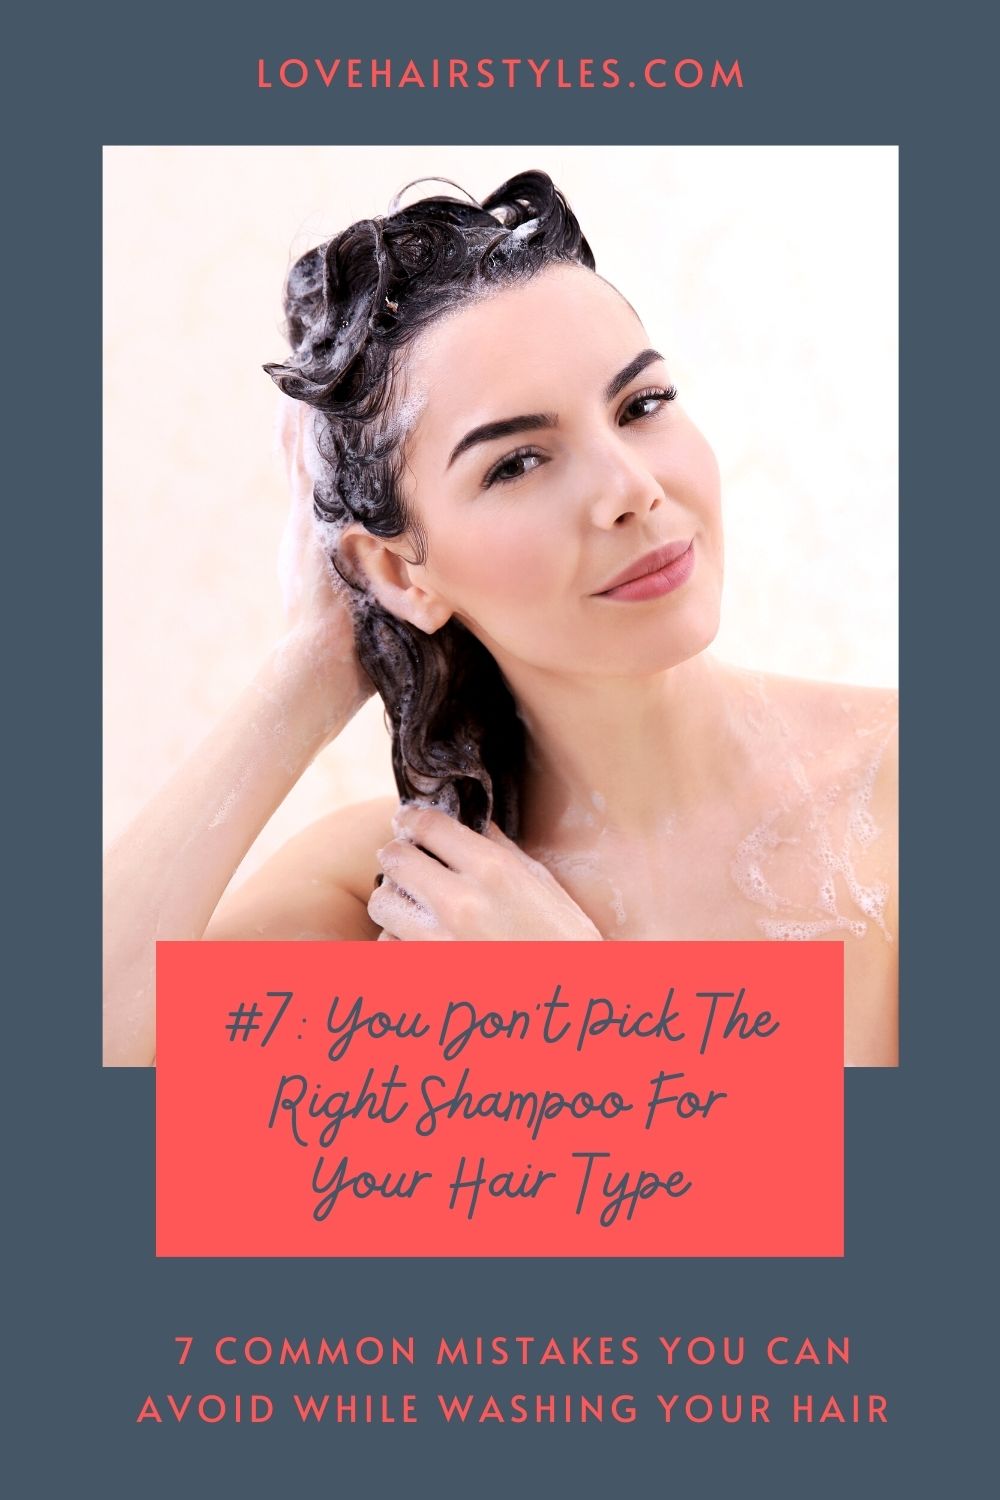 How To Wash Your Hair: The Most Detailed Guide - Love Hairstyles